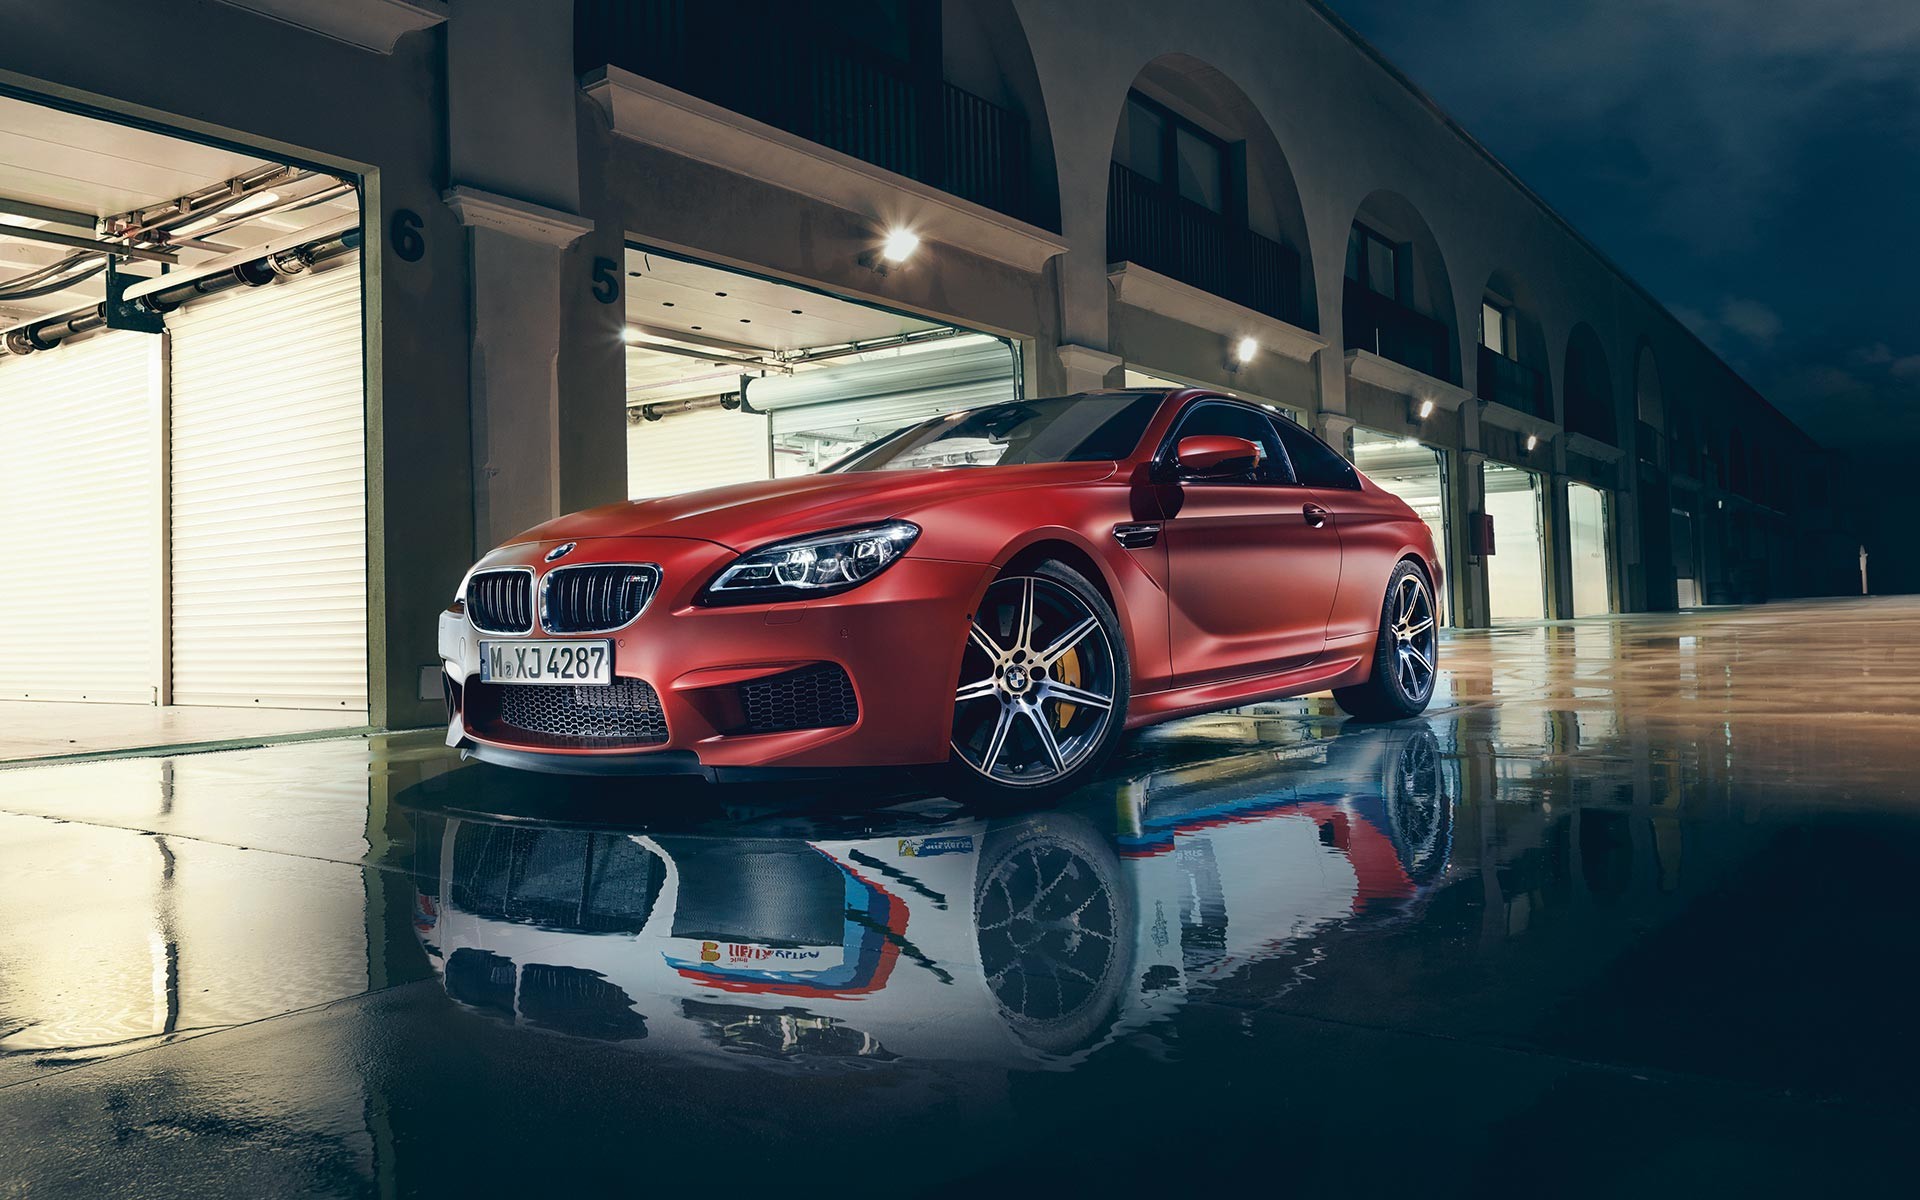 General 1920x1200 car BMW sports car urban building dtm reflection night lights garage red cars coupe BMW M6 BMW 6 Series BMW F12/F13/F06 vehicle numbers